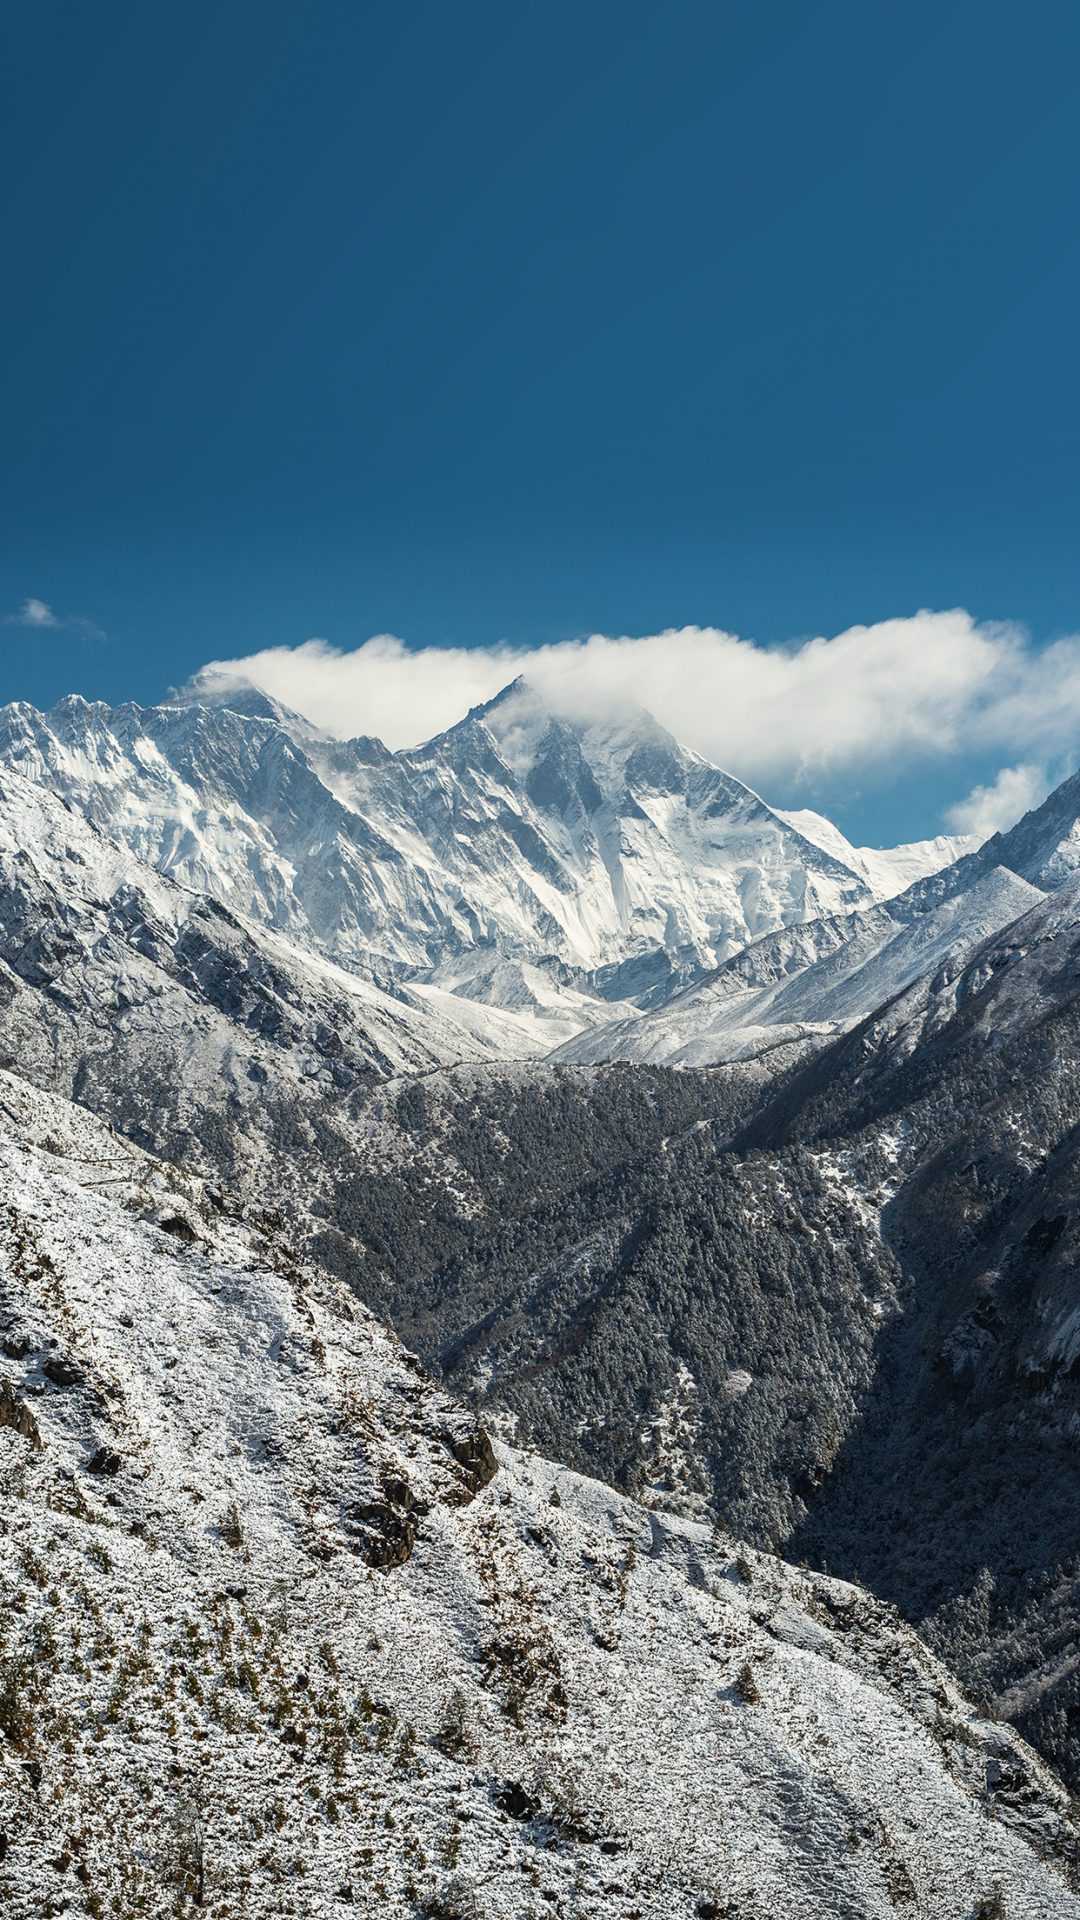 A stupa under snow (left) on the trail to Tengboche monastery (centre). Mt Everest (8850m) is making clouds just left of centre, with Lhotse (8498m) partly obscured just to the right. Far right is Ama Dablam peak.